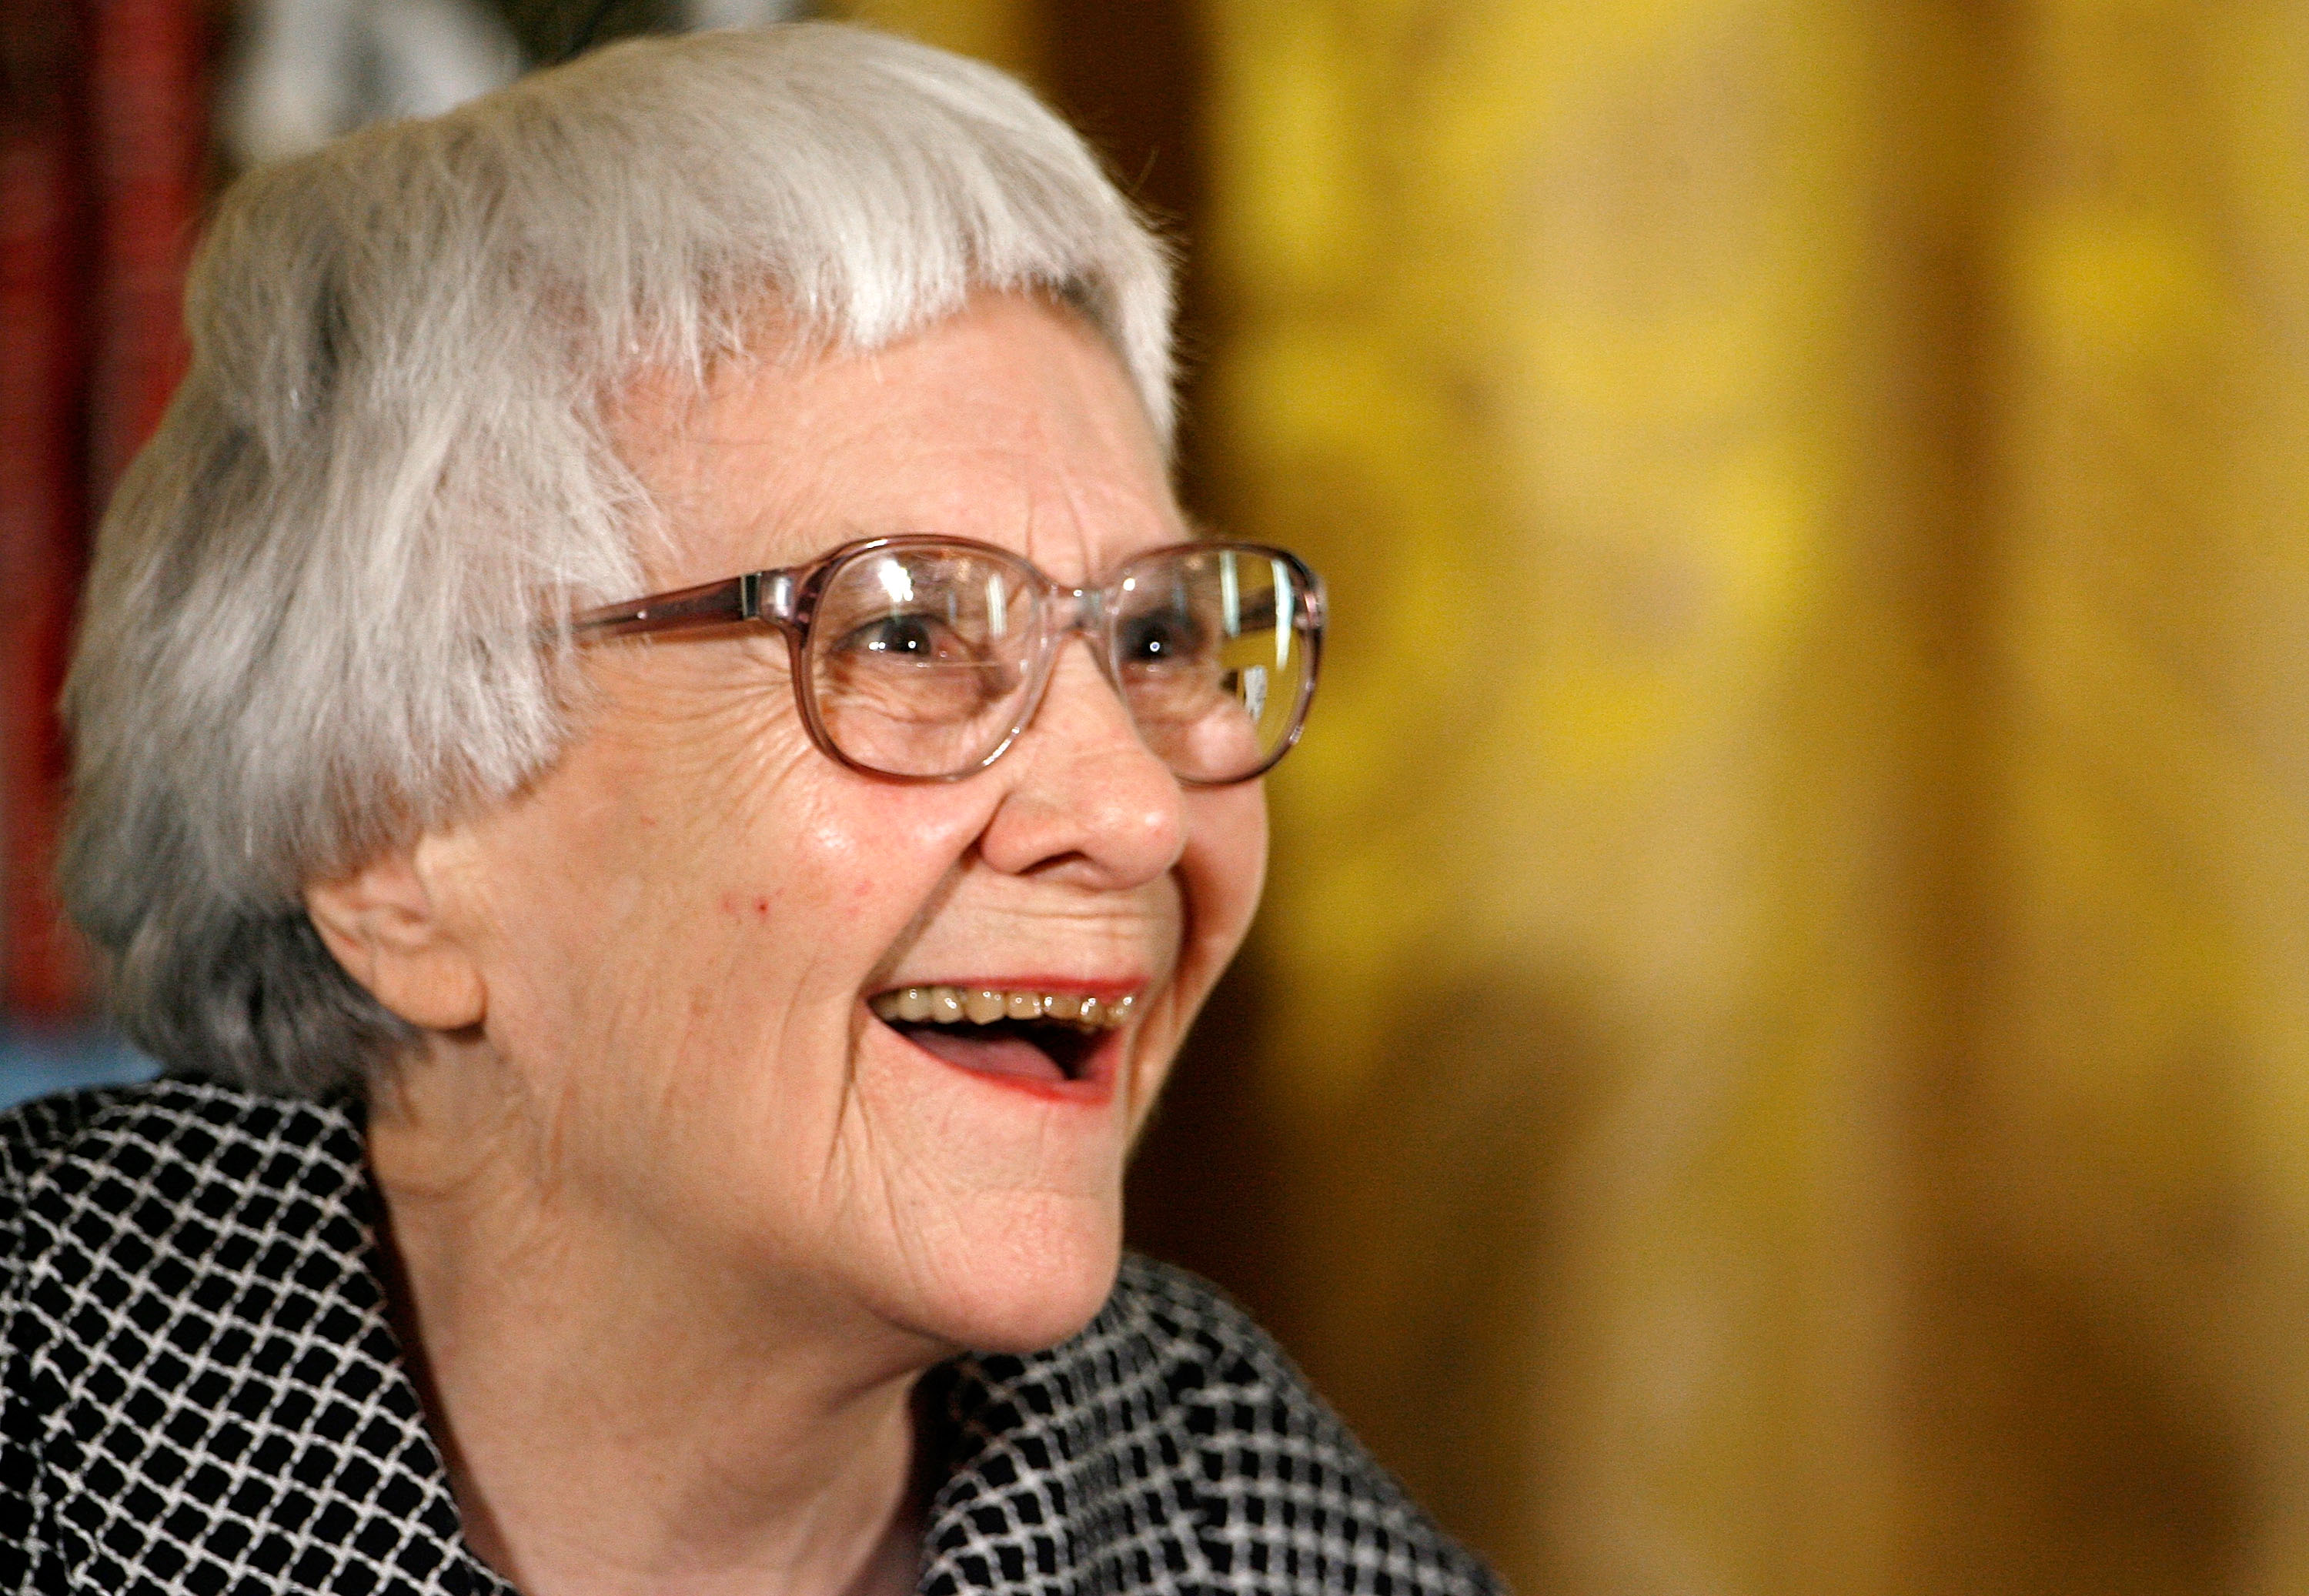 Pulitzer Prize winner and <i>To Kill A Mockingbird</i> author Harper Lee smiles before receiving the 2007 Presidential Medal of Freedom at the White House on Nov. 5, 2007 in Washington, DC. (Chip Somodevilla—2007 Getty Images)